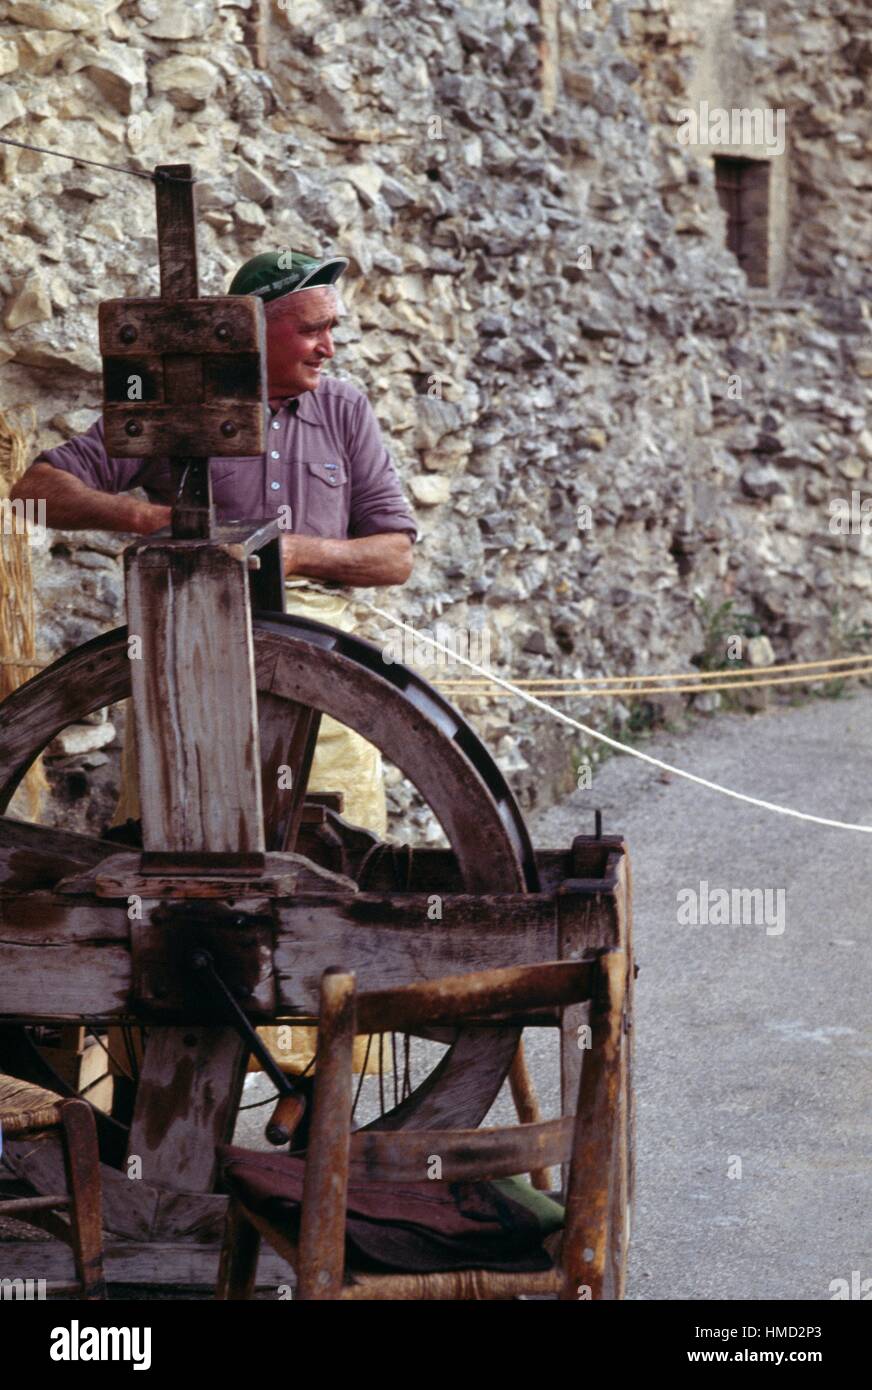 A ropemaker with a rope-making machine, Bevagna, Umbria, Italy